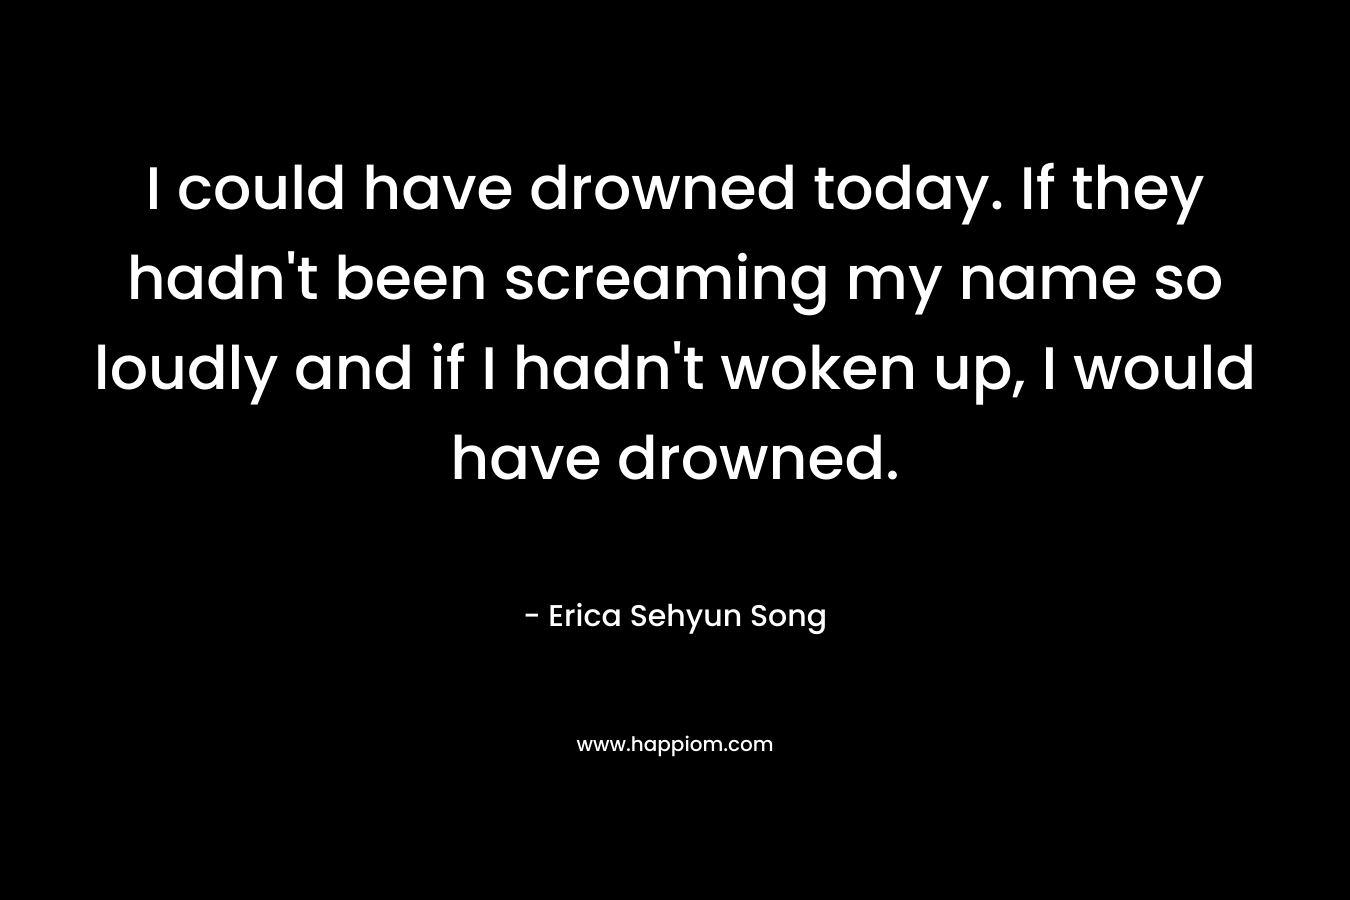 I could have drowned today. If they hadn't been screaming my name so loudly and if I hadn't woken up, I would have drowned.